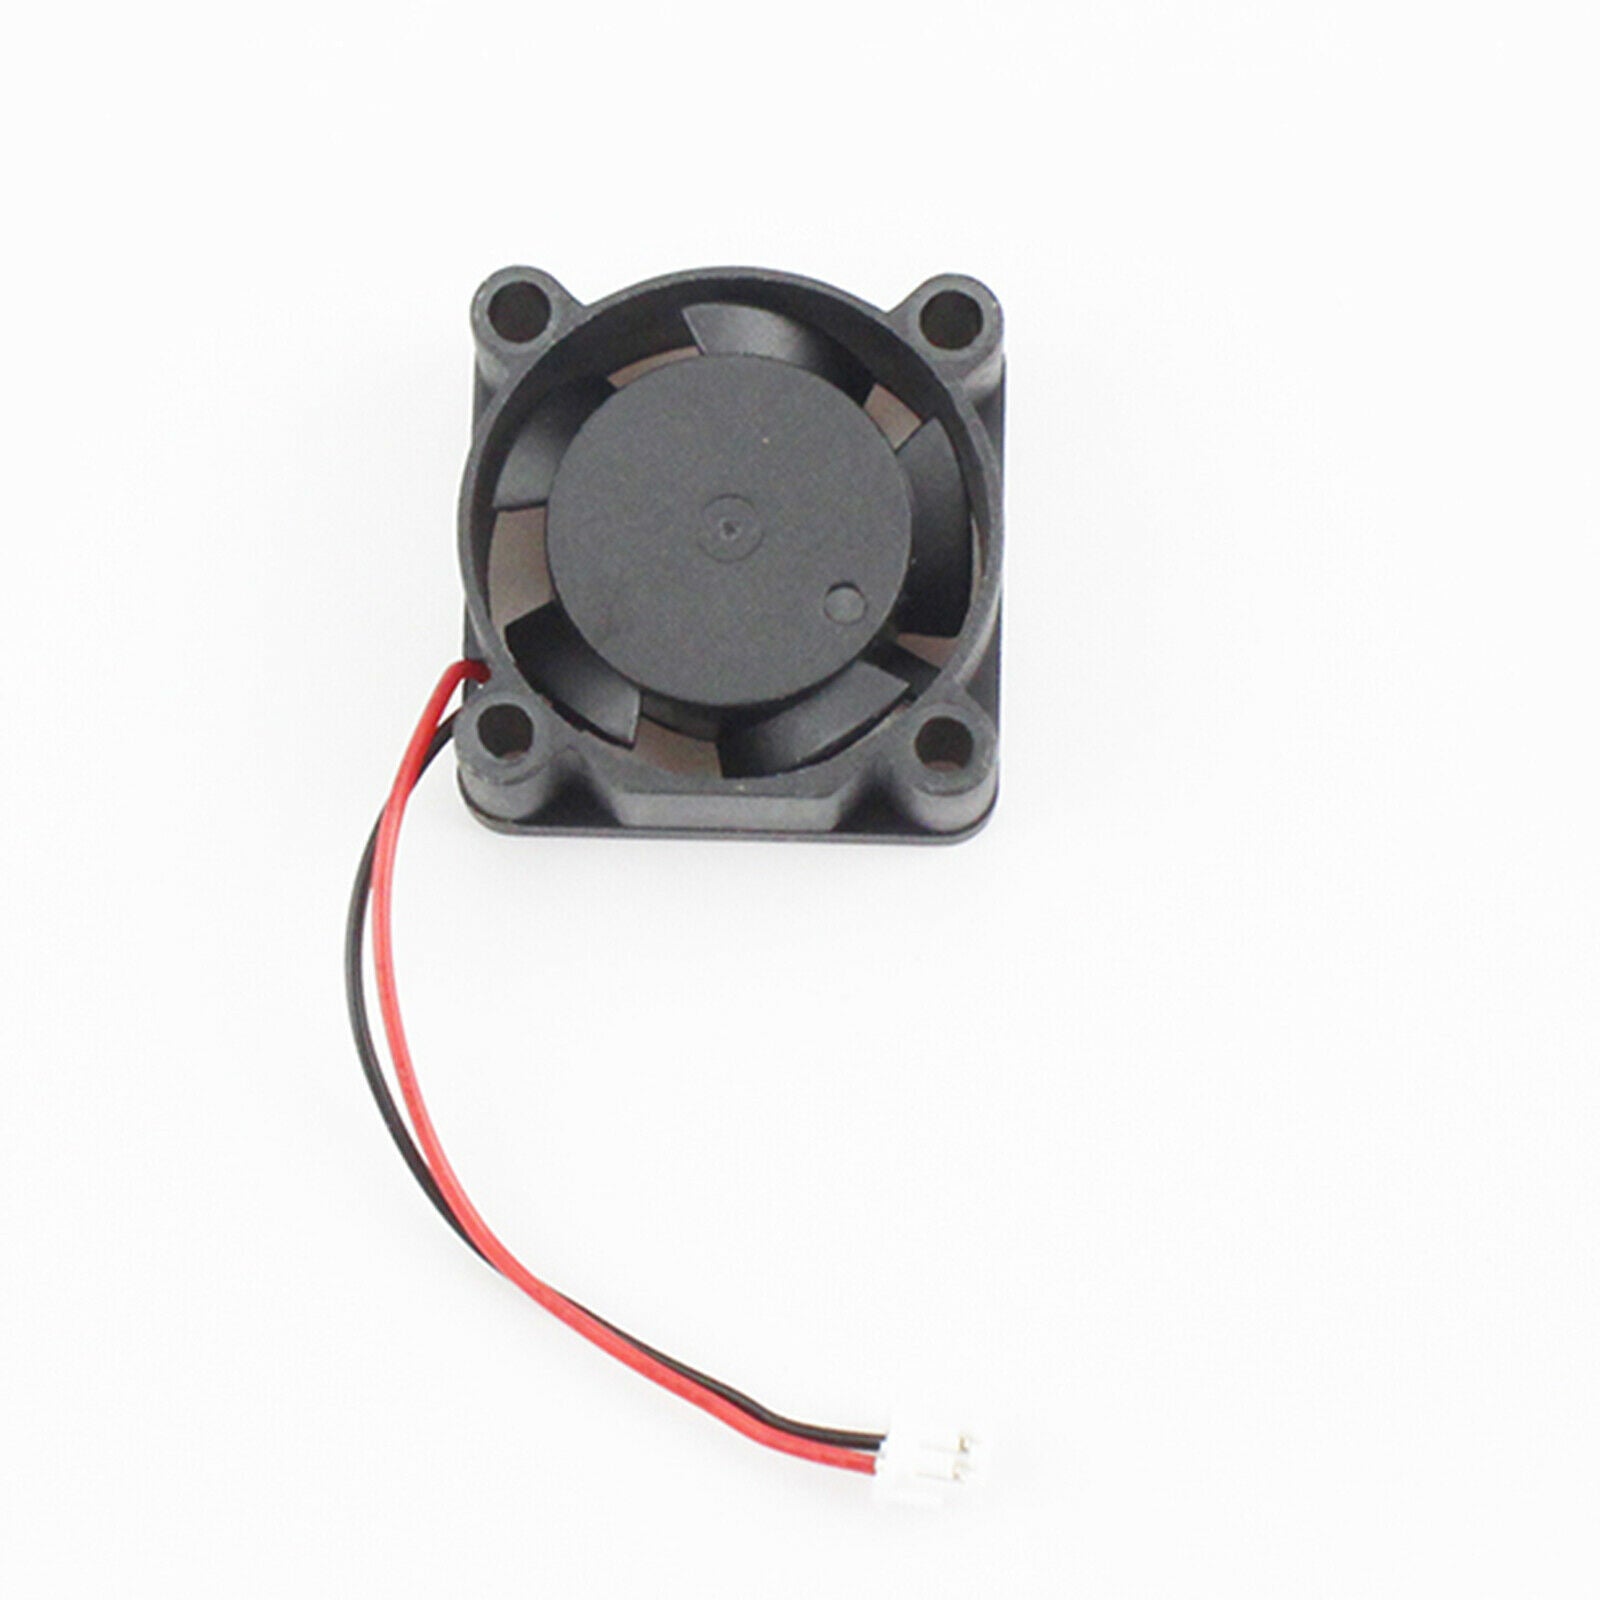 Motor Heat Sink Cooling Fan for WLTOYS 104001 RC Car Buggy Truck Replaces